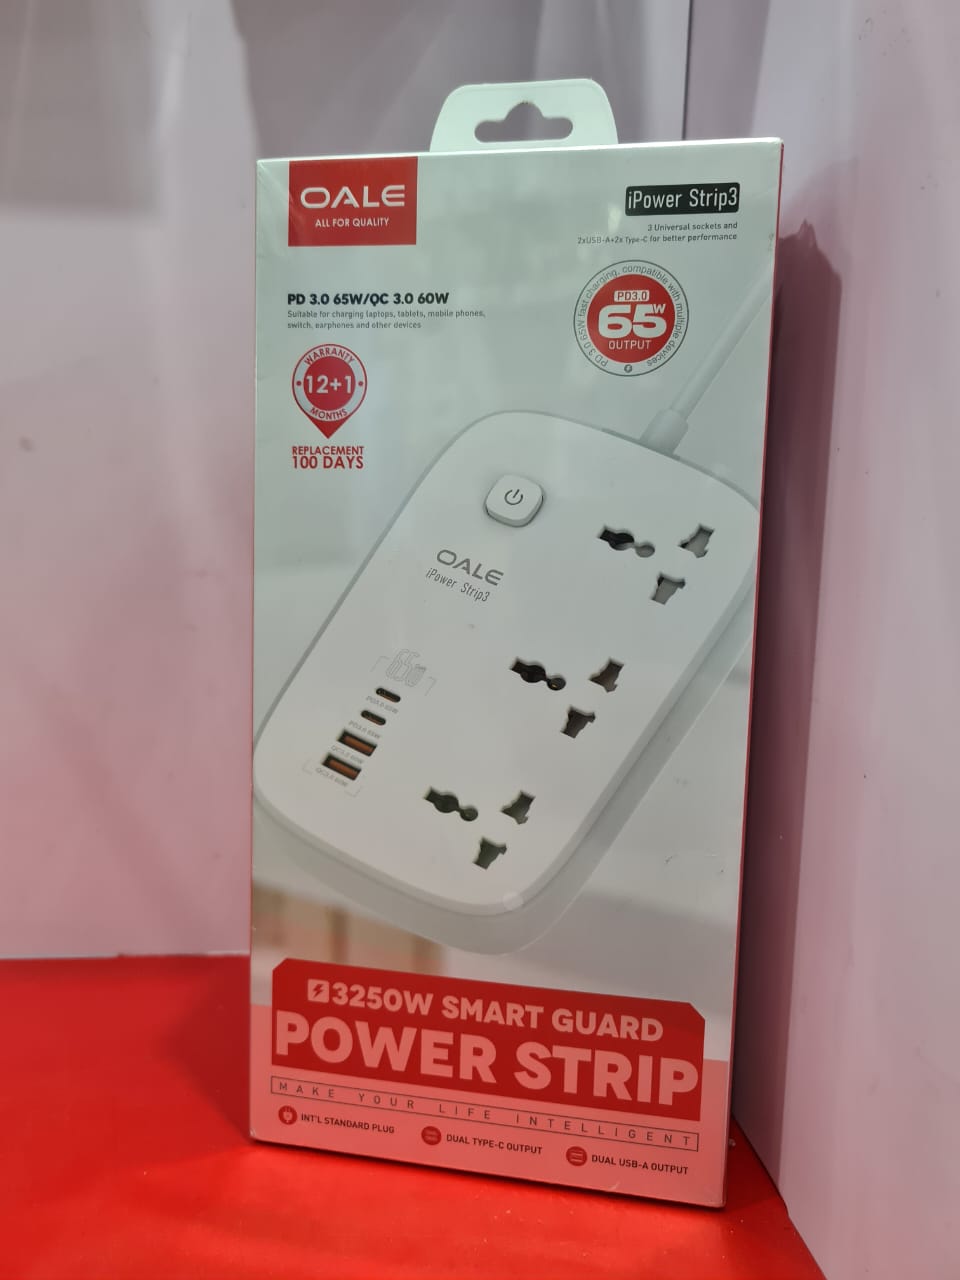 OALE iPower Strip3 Extension Cable with 7 Outlets